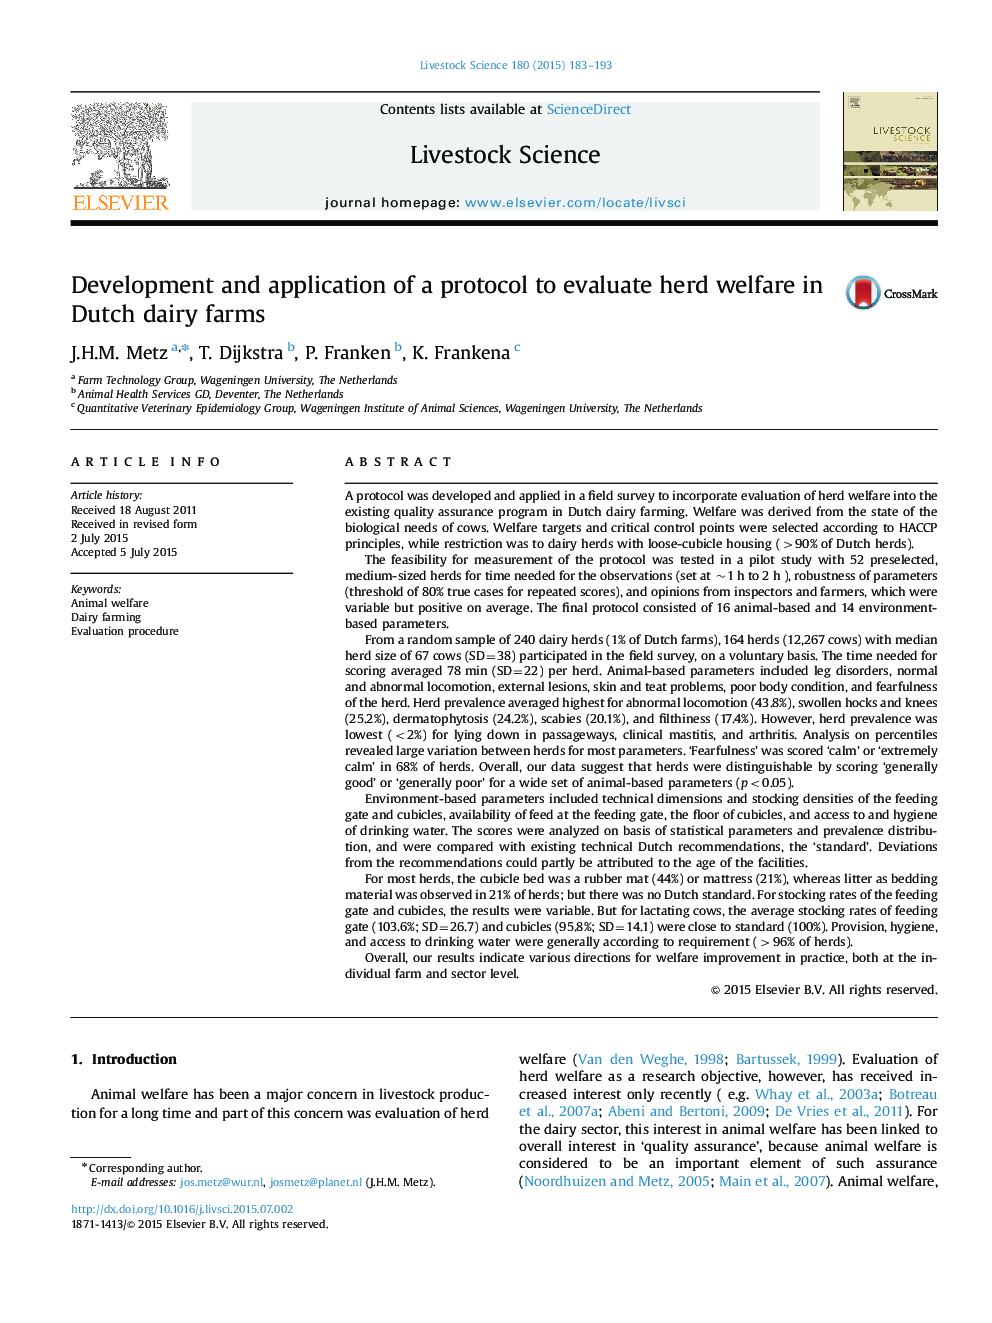 Development and application of a protocol to evaluate herd welfare in Dutch dairy farms